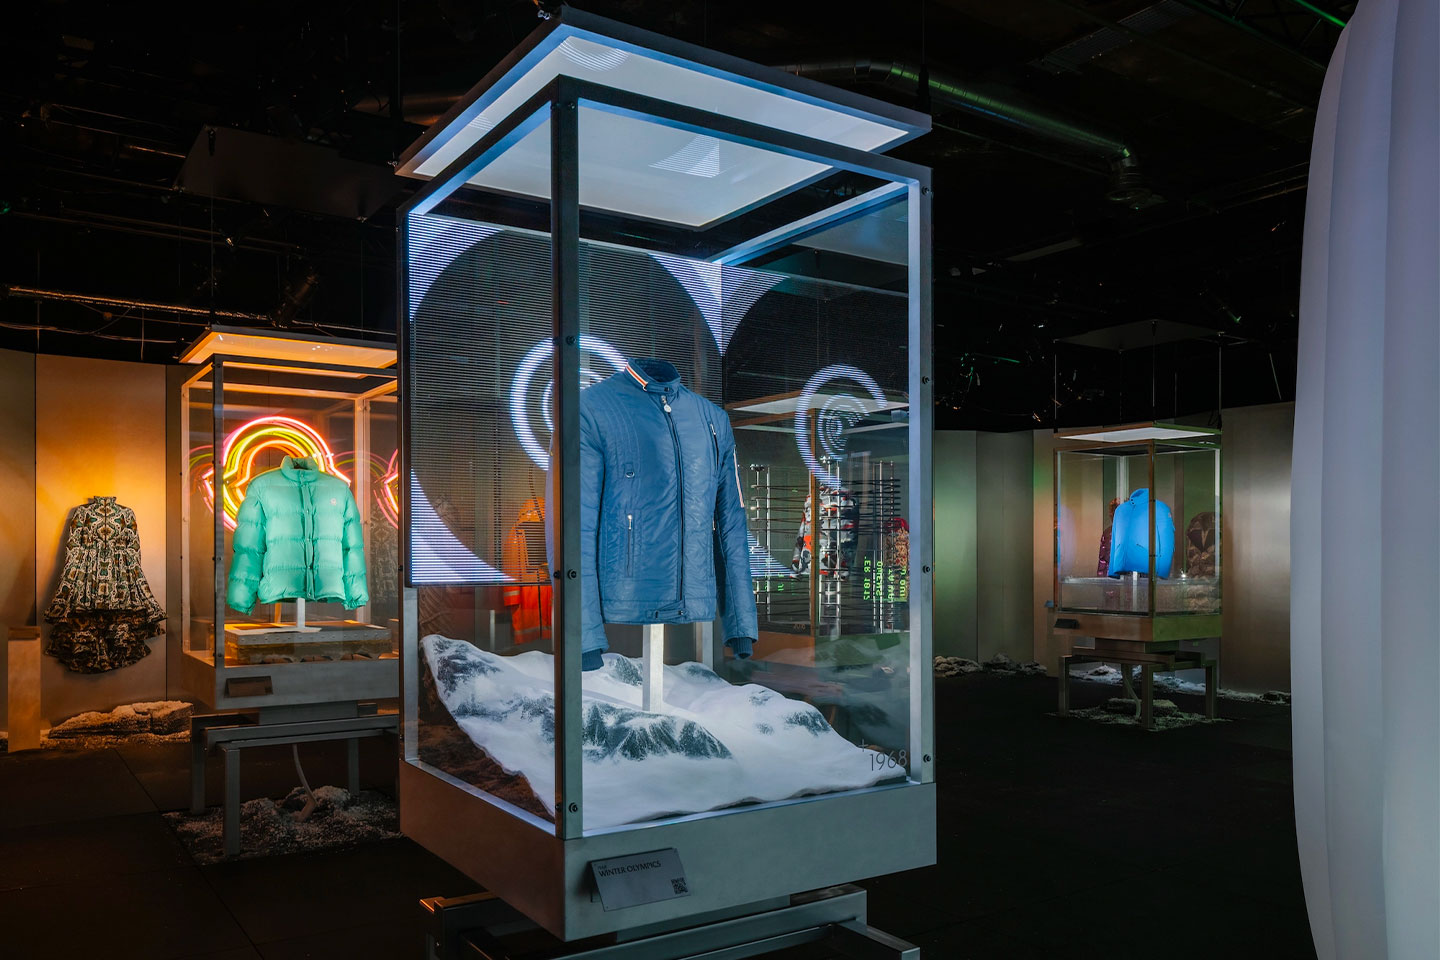 Moncler's iconic pieces were on display